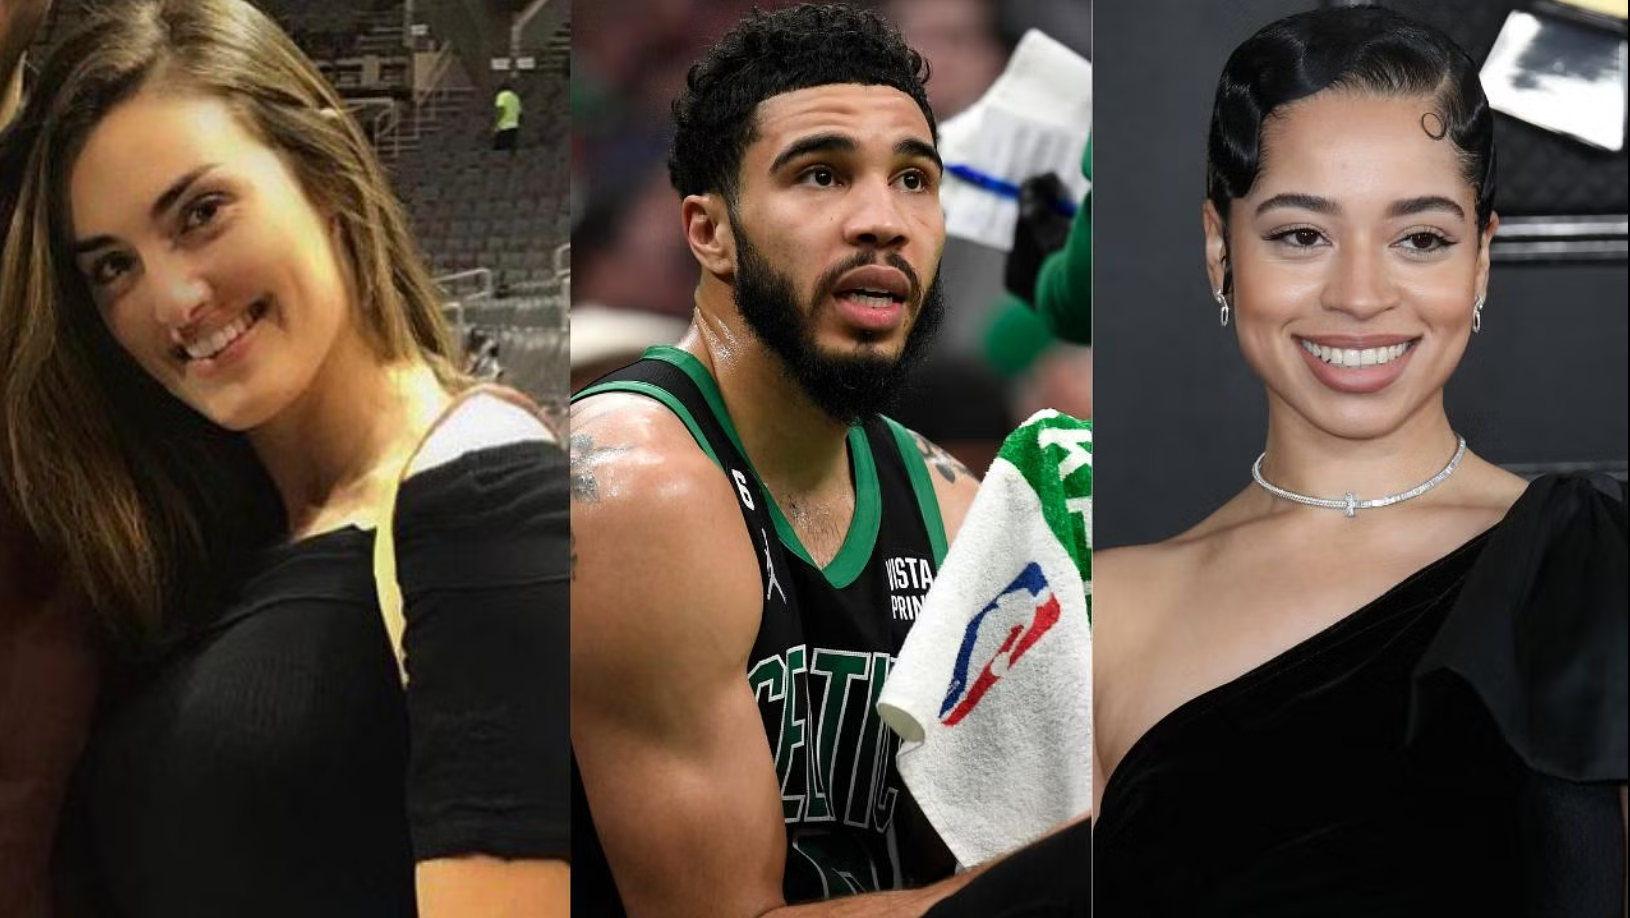 Who is Jayson Tatum wife? Is he married ? Find out everything you need to know about Jayson Tatum’s wife and his love life.